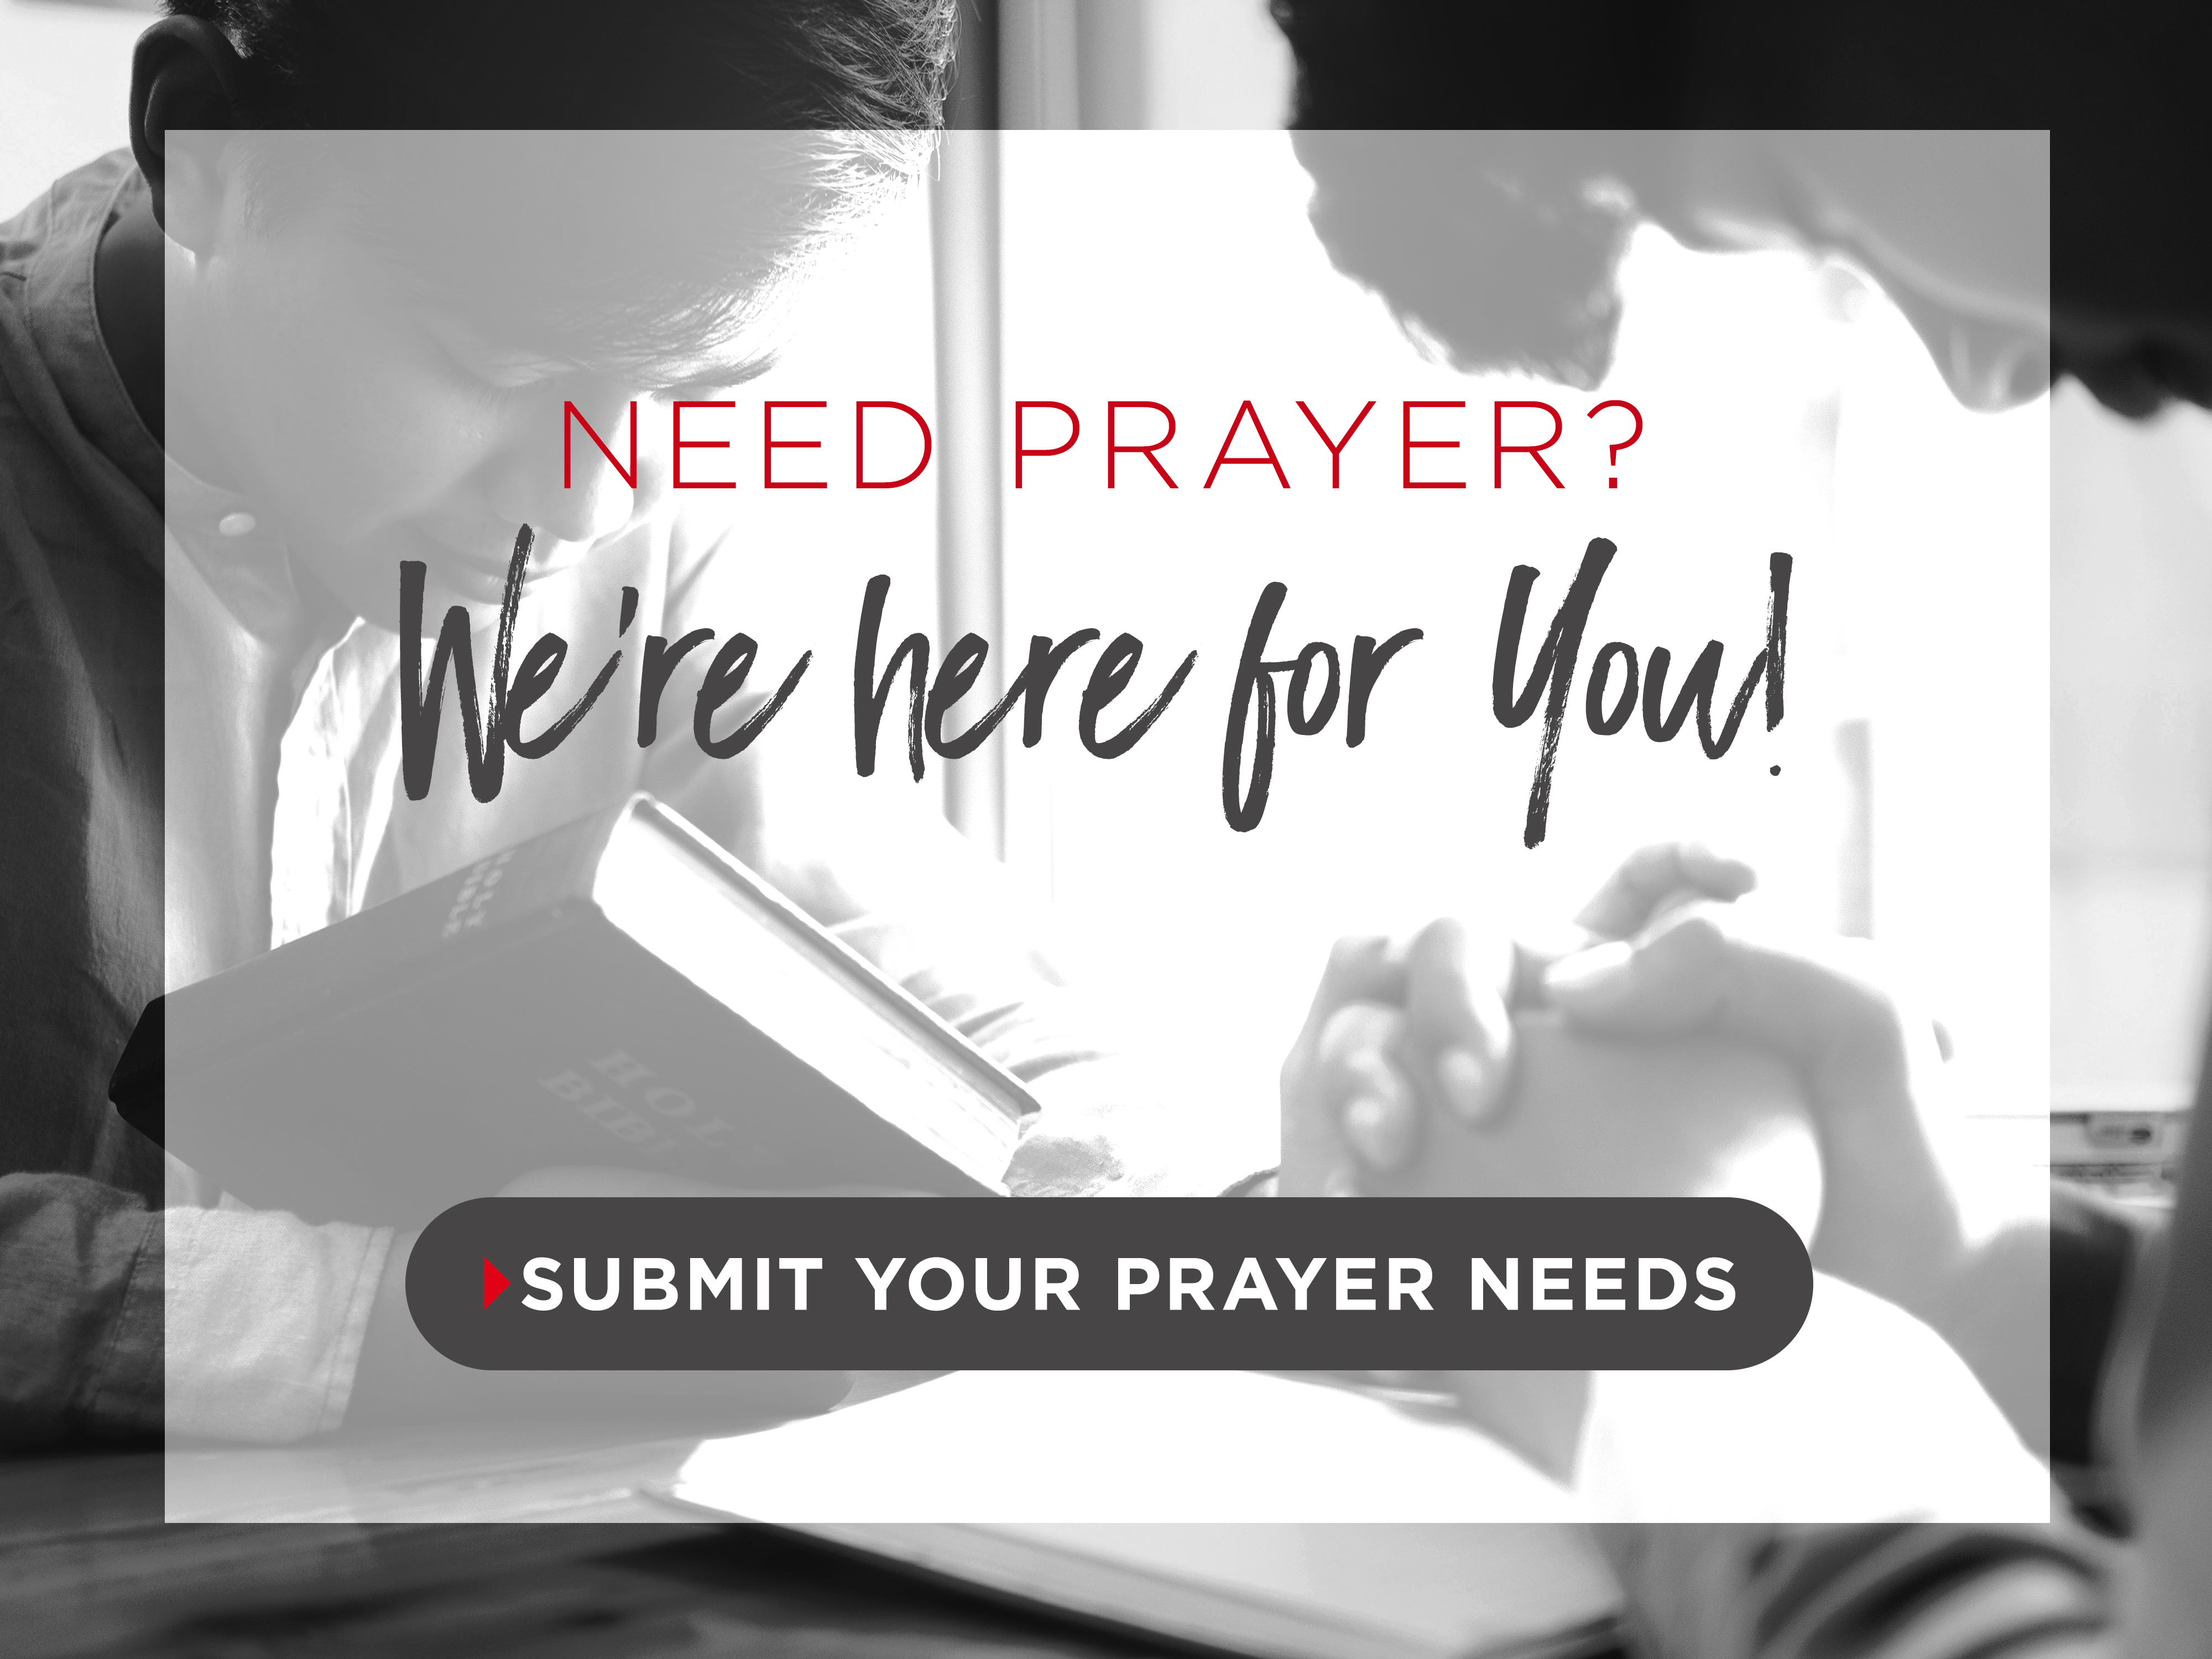 Need Prayer? We're here for you! Submit your prayer needs.